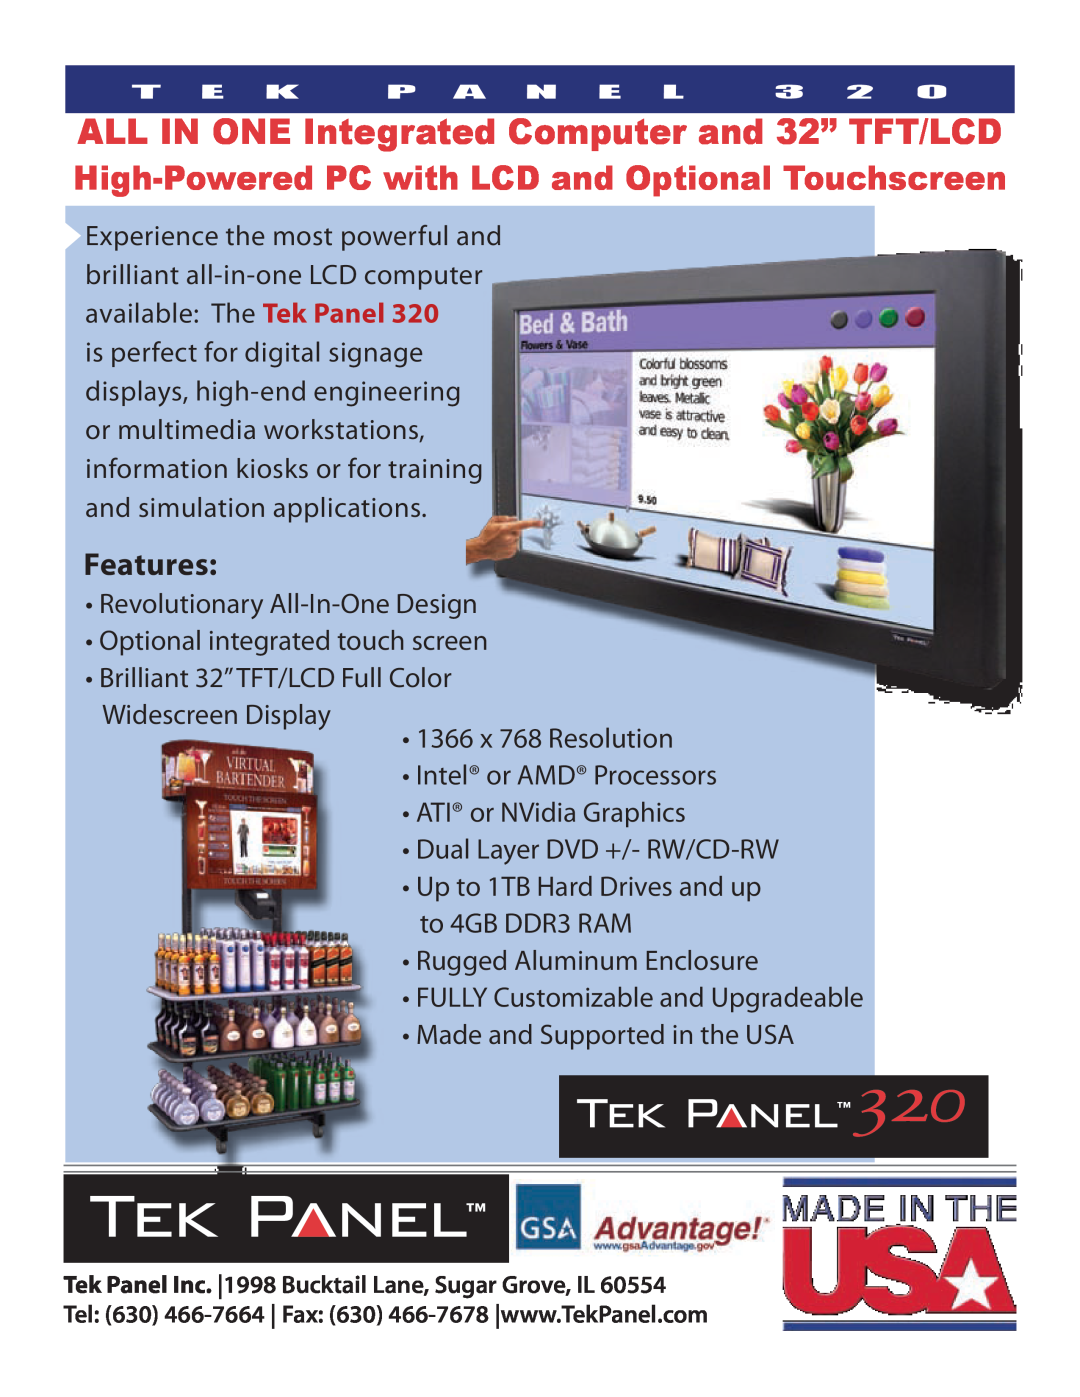 Hy-Tek Manufacturing 320 manual ALL IN ONE Integrated Computer and 32” TFT/LCD, Features 